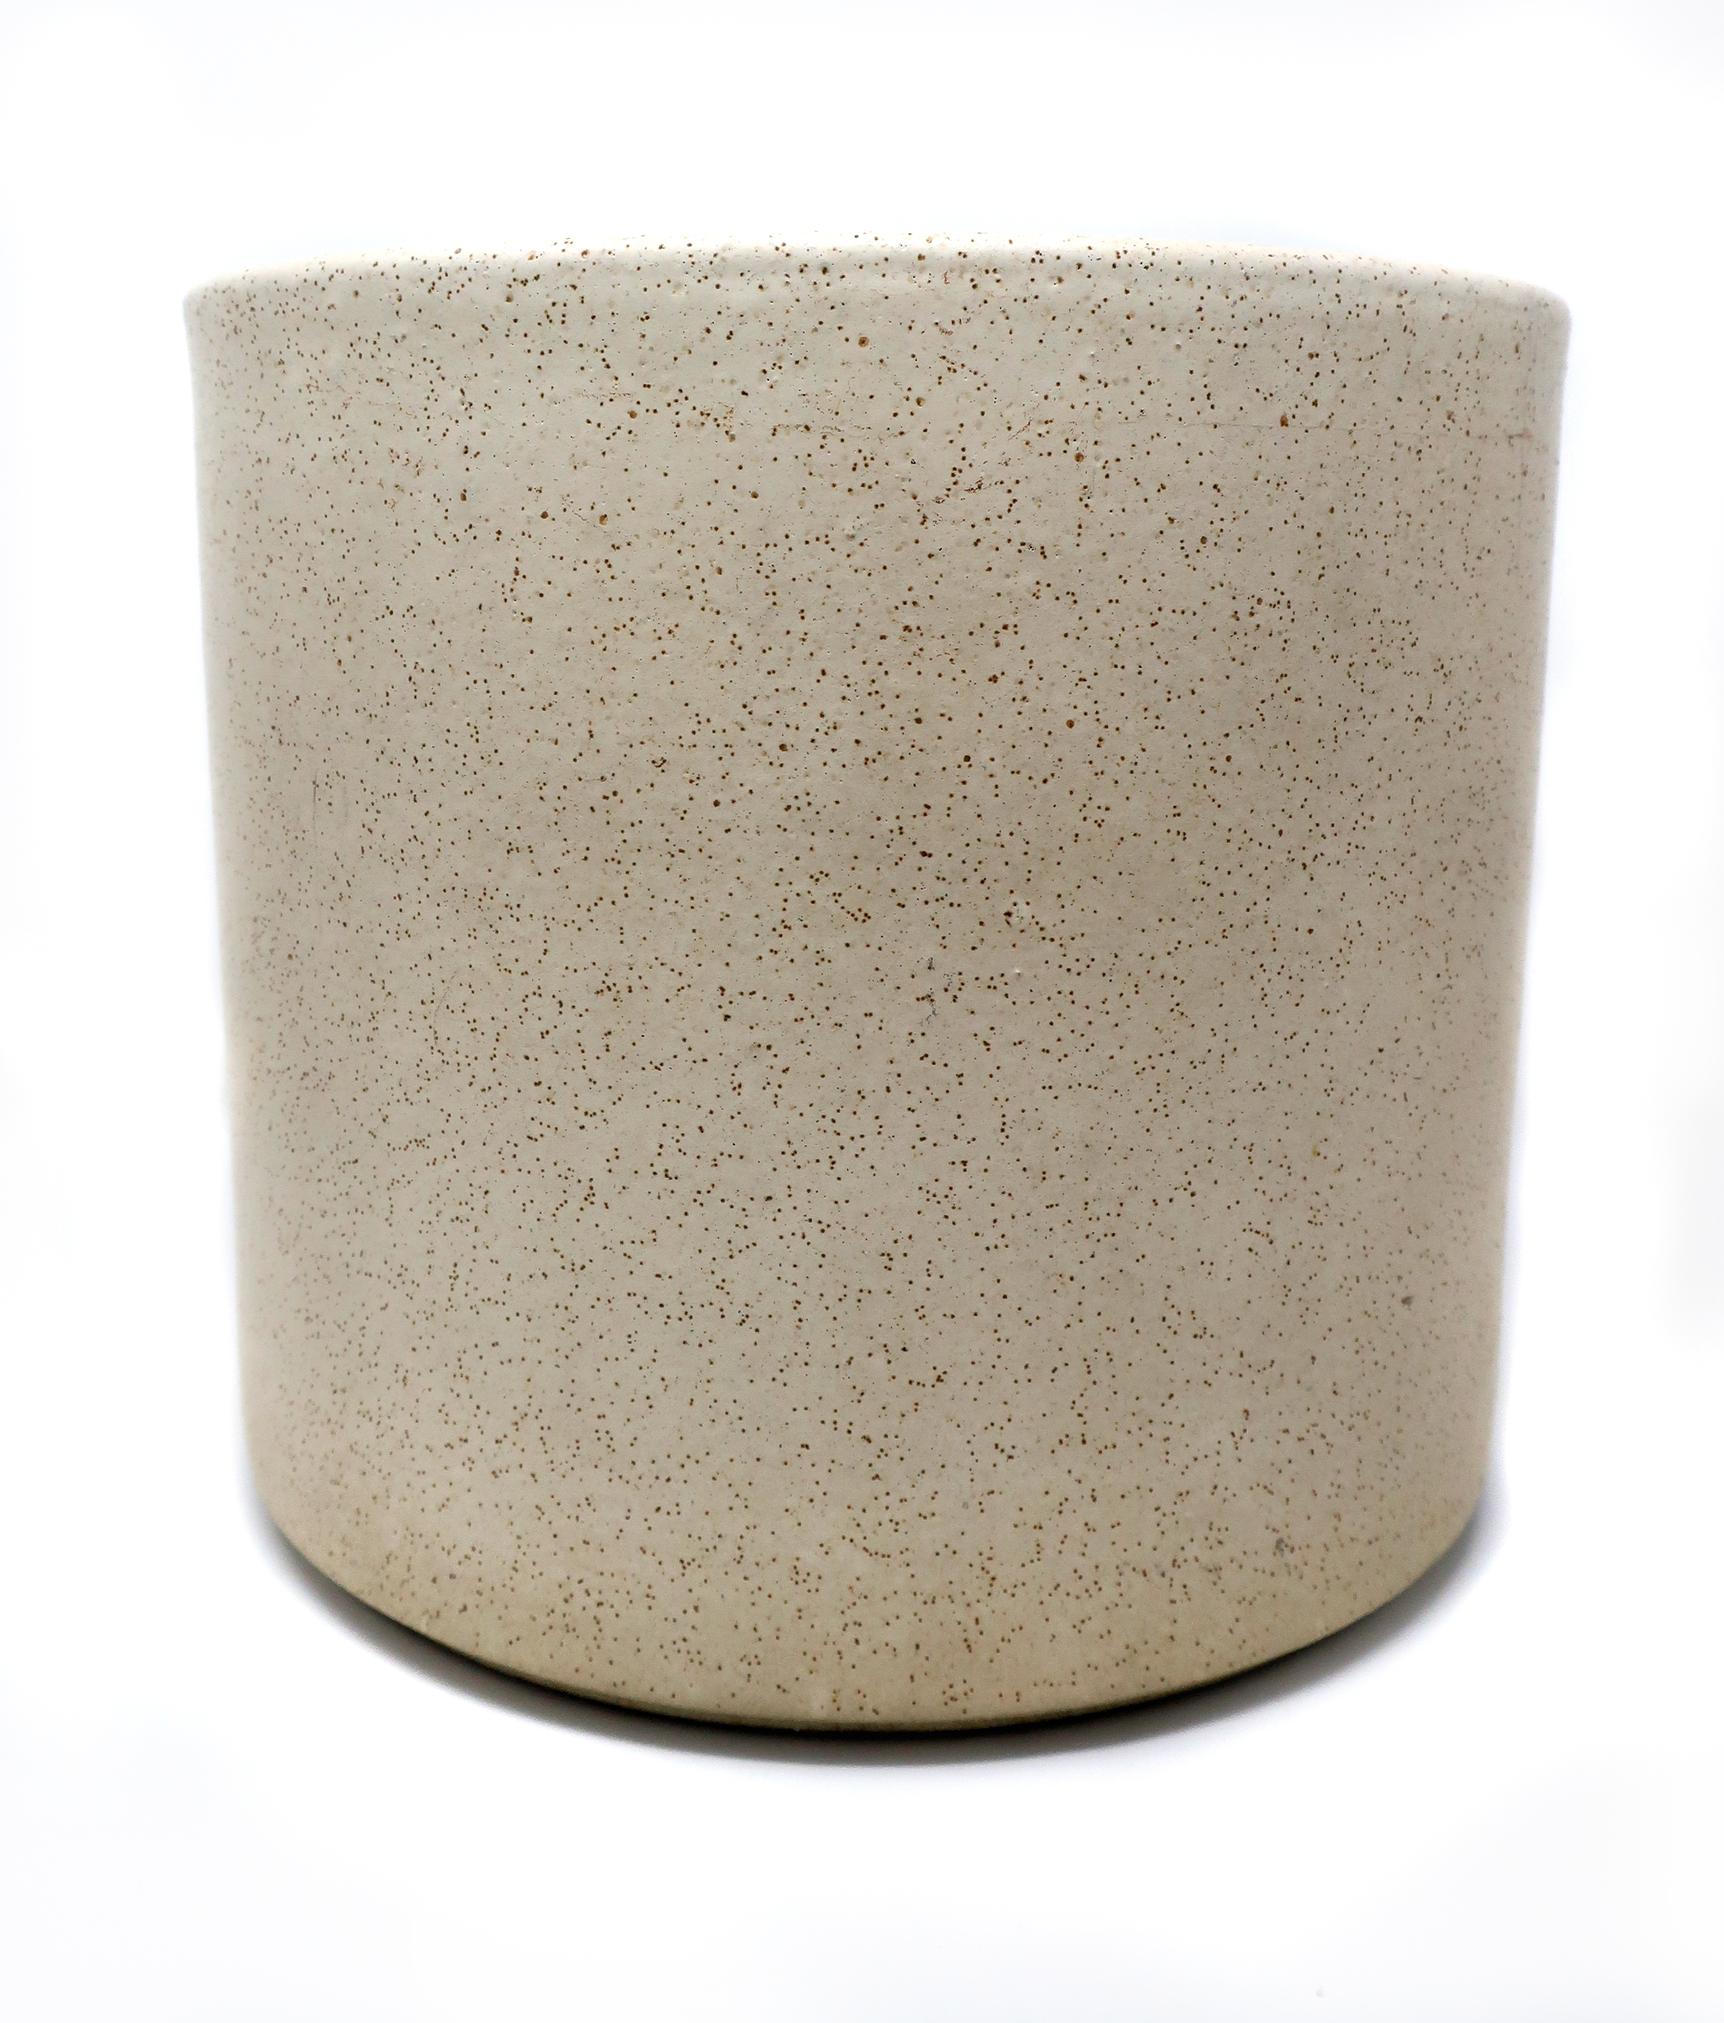 A fantastic off-white Gainey AC 10 ceramic planter with brown speckling that epitomizes the charm and craftsmanship of California handcrafted ceramics. Originally introduced in the early 1960s as the C series, the design was tweaked in the 1970s to